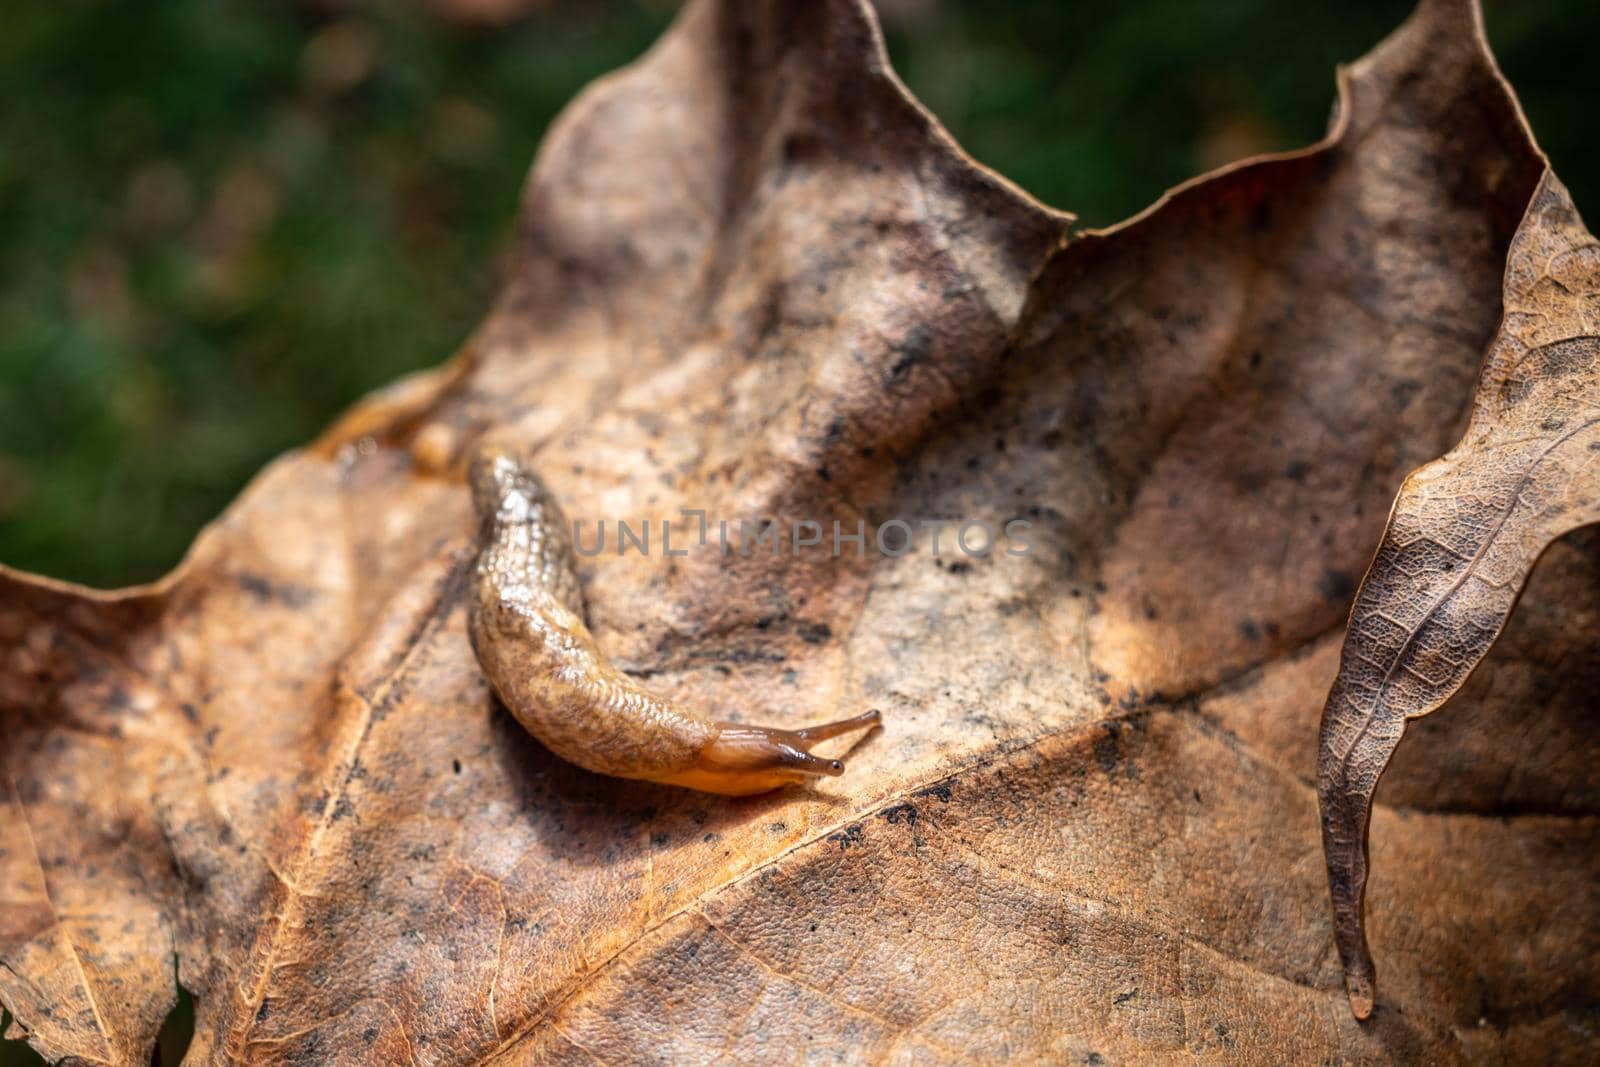 A brown land slug crawls across a dry maple leaf, its slimy body gliding across the textured surface.